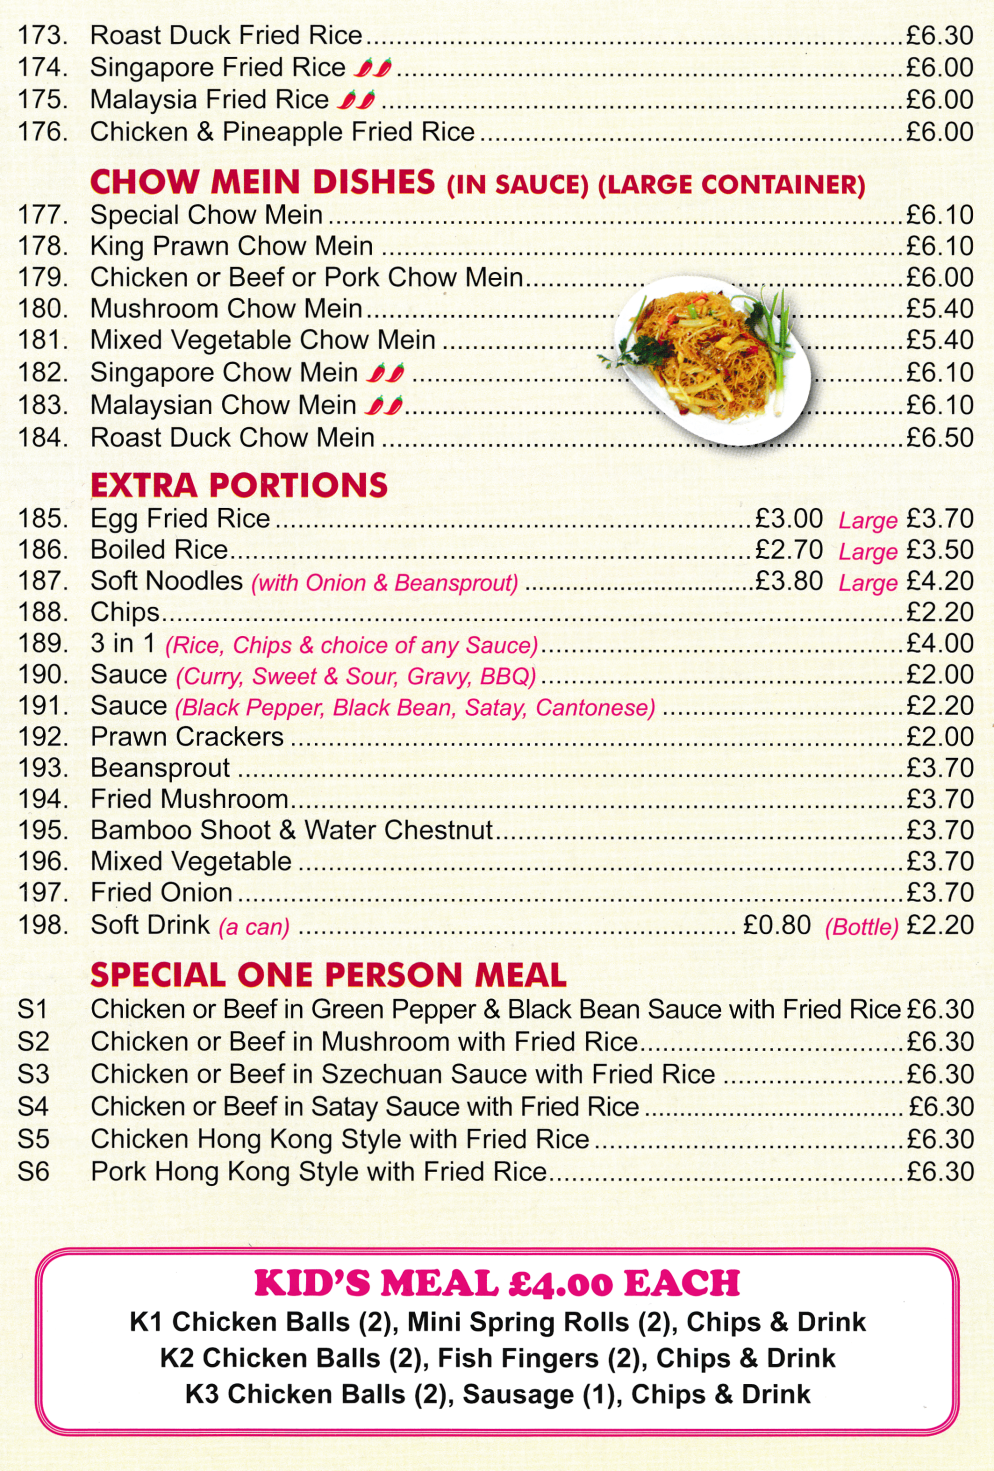 Menu for G&N's Kitchen - Chicken Chow Mein, Singapore Fried Rice, Malaysian Chow Mein, Special One Person Meals..